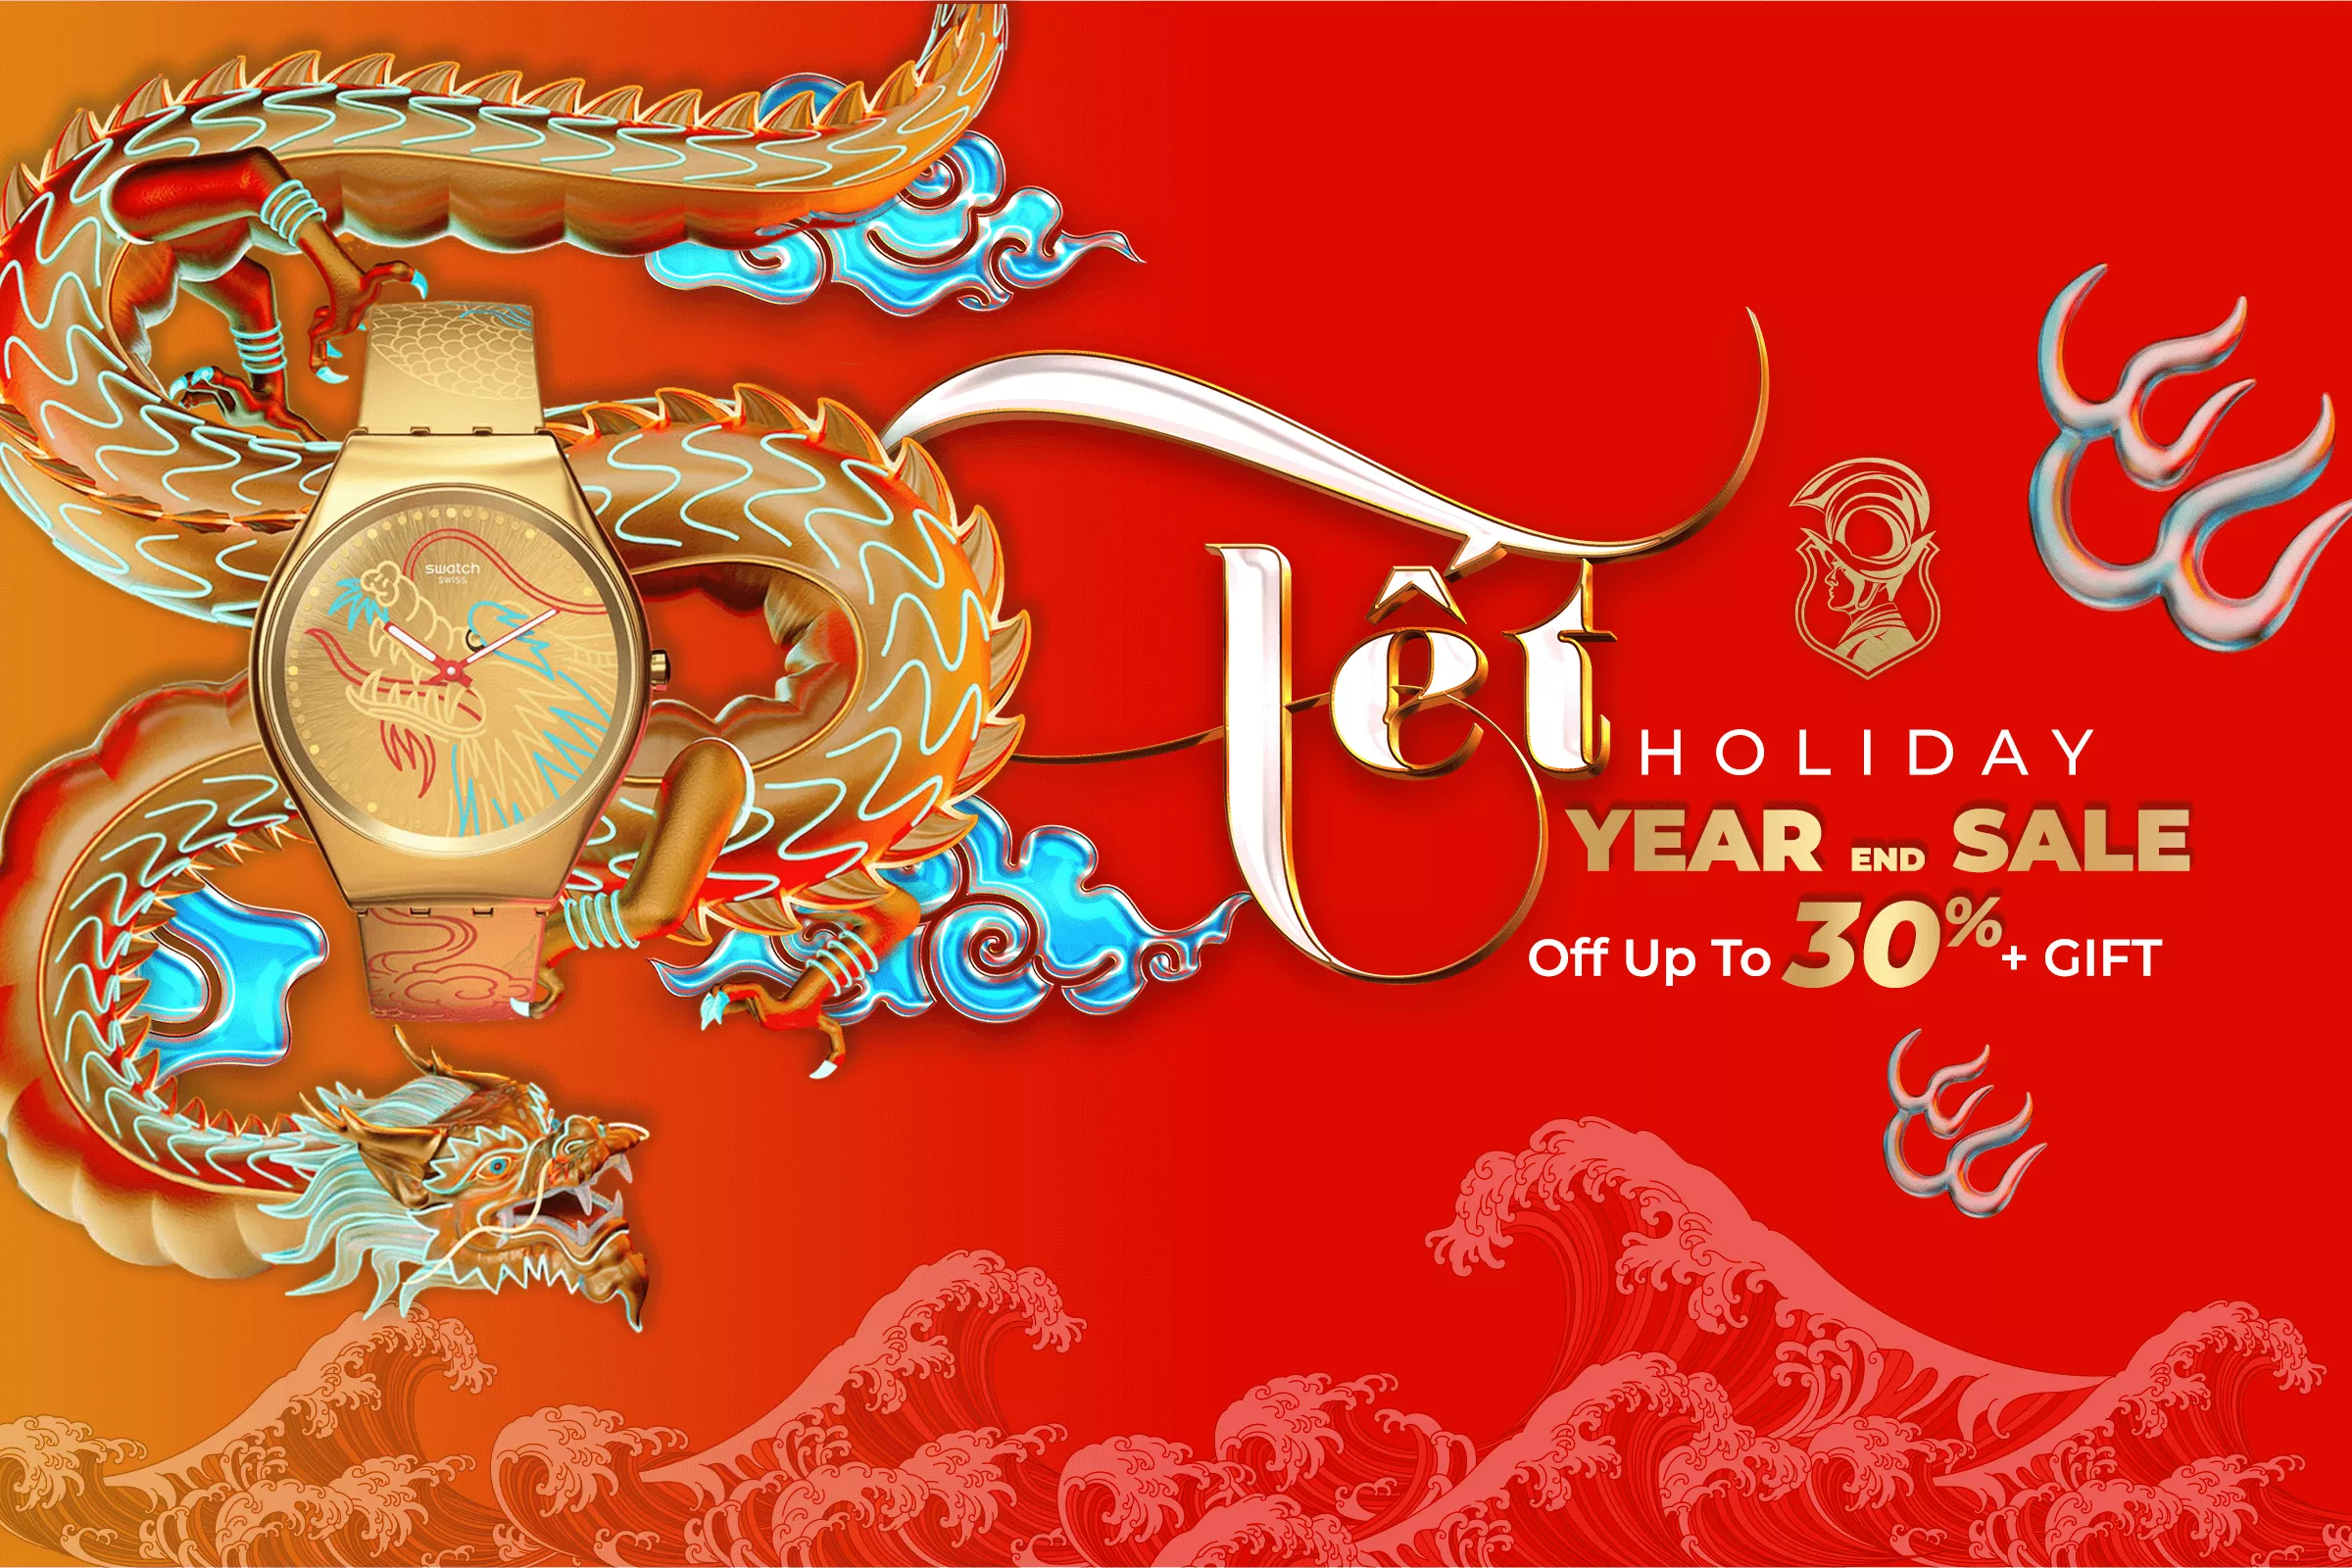 Tet Holiday - Year End Sale